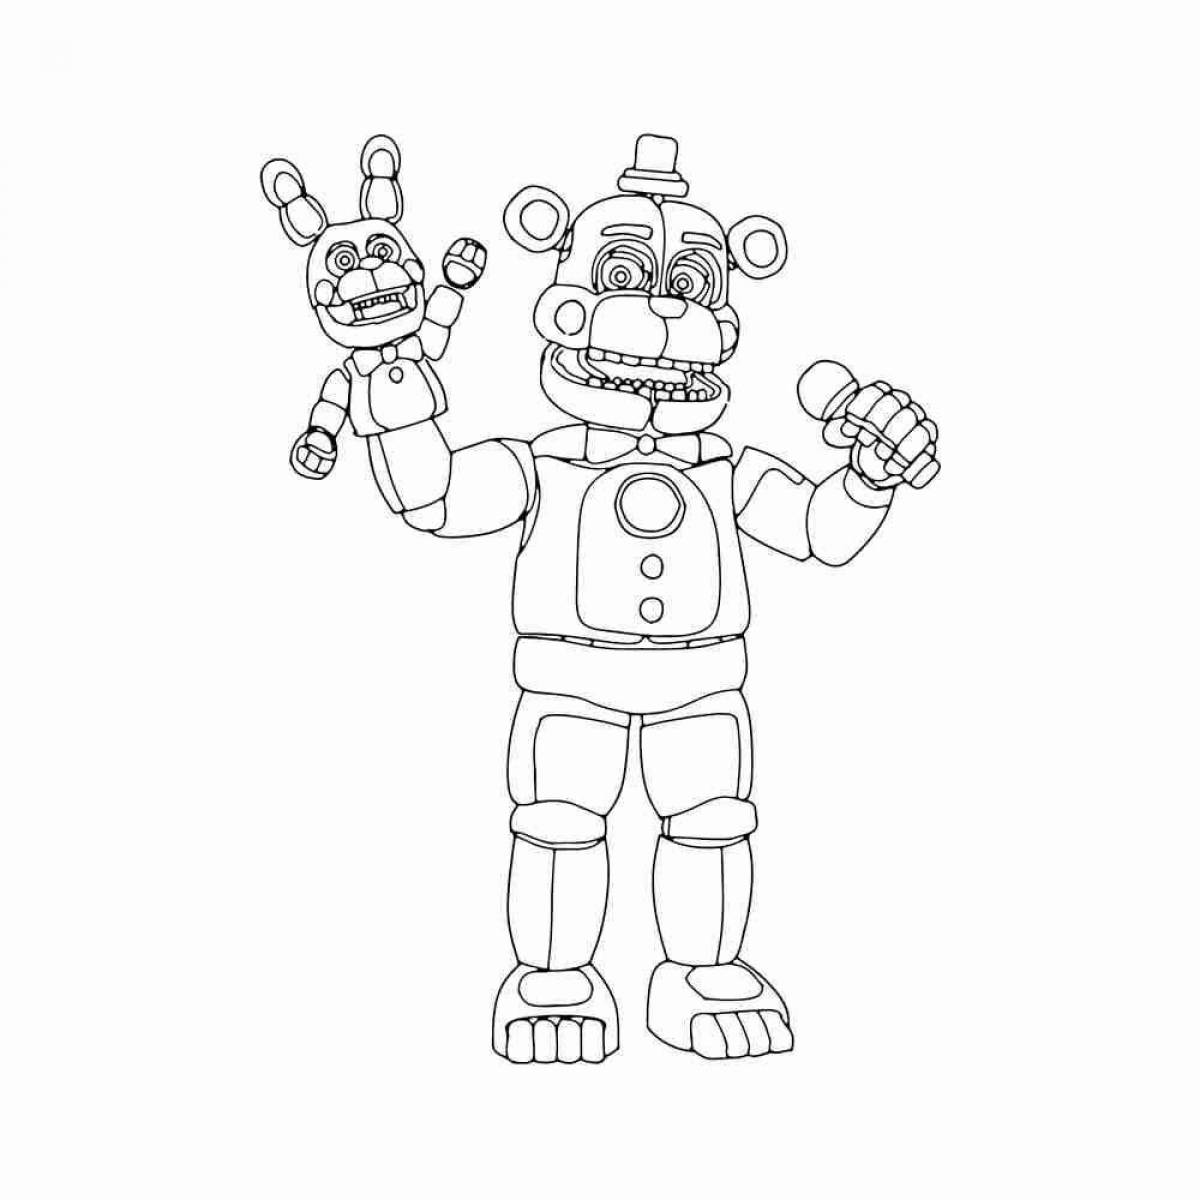 Monty funny animatronic coloring book